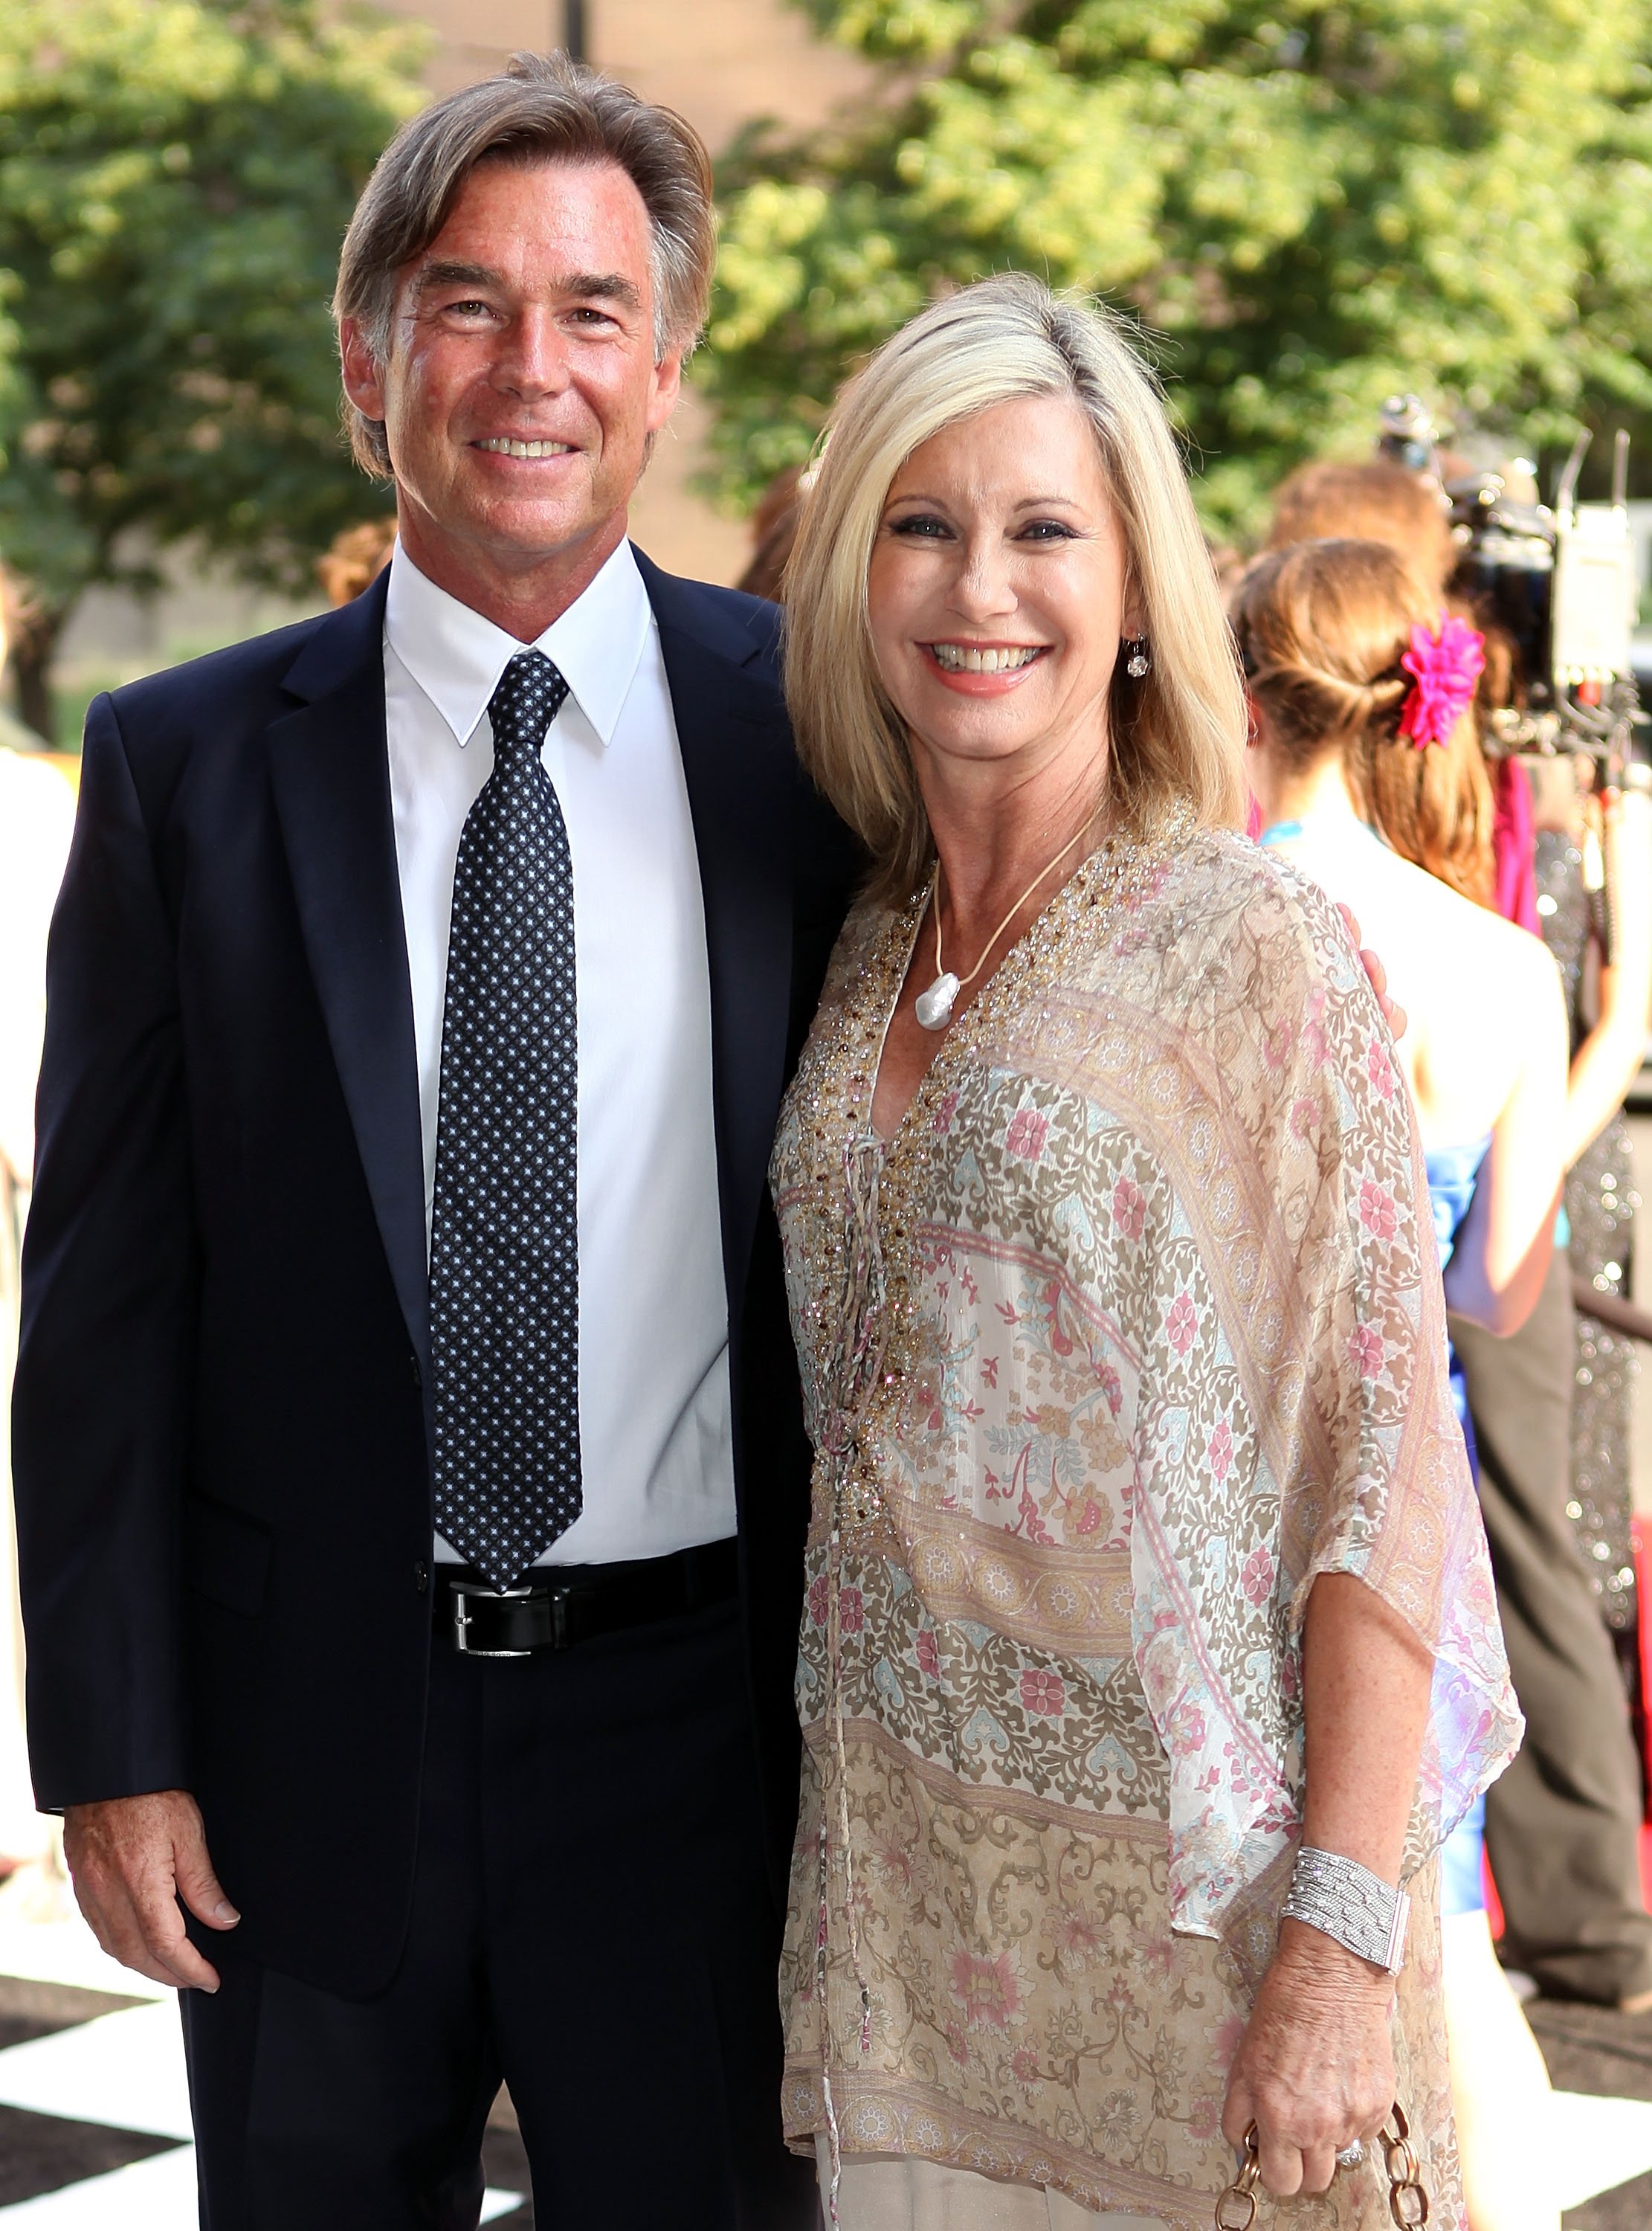 John Easterling and Olivia Newton-John at 2012 Indy 500 Snakepit Ball at Indiana Roof Ballroom on May 26, 2012 in Indianapolis, Indiana. | Source: Getty Images 